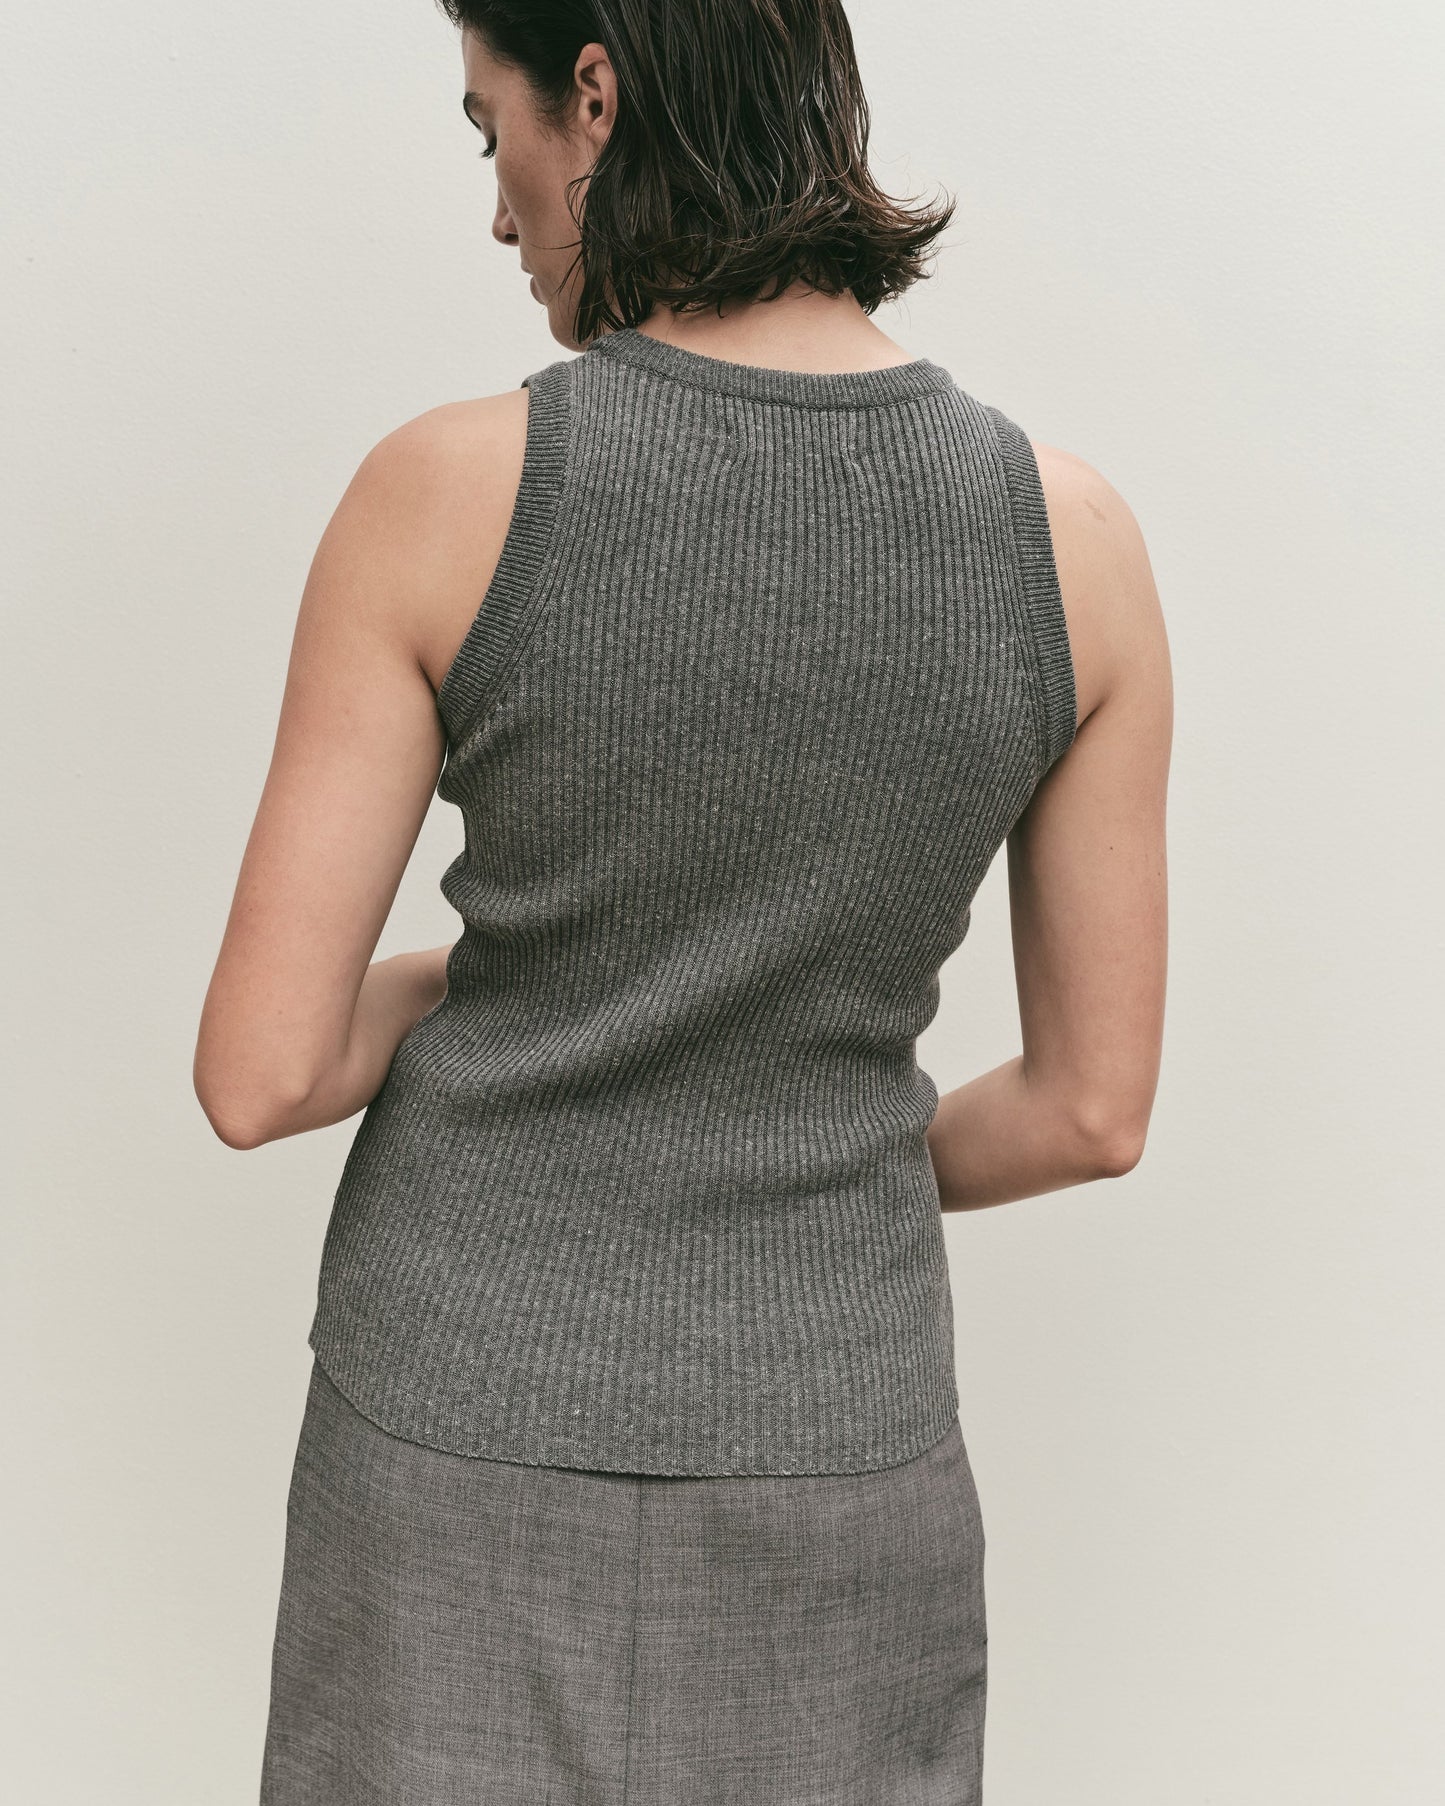 Gray Knitted Tank Top